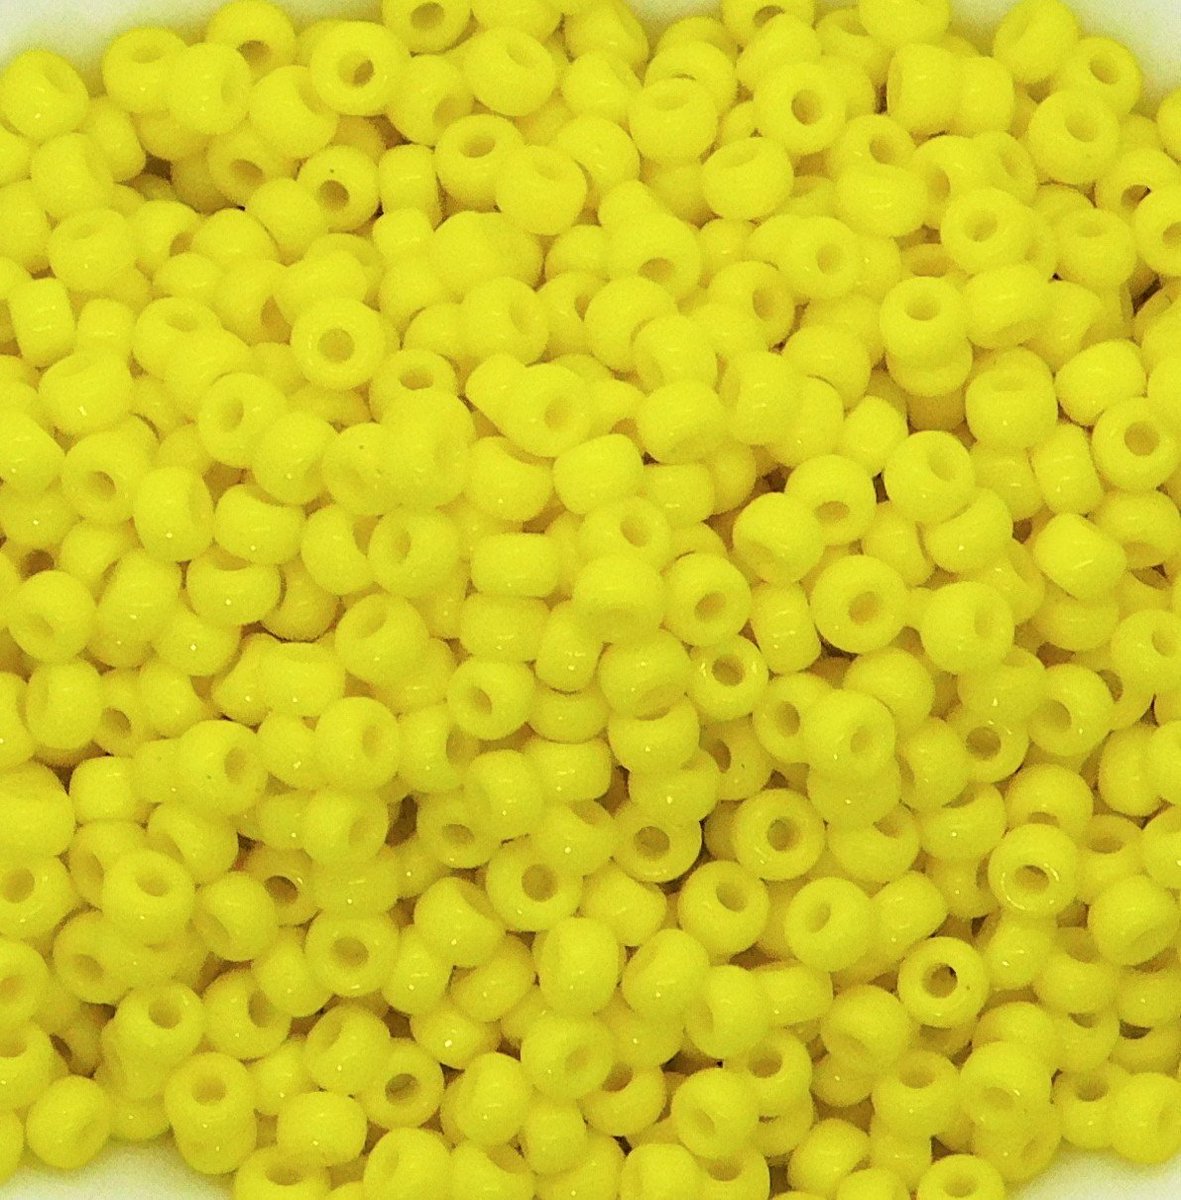 New Miyuki 11/0 Seed Beads in Opaque Canary Yellow!  Such a sunny, happy color that makes me think of summer. etsy.me/2oSBbbK #miyukiseedbeads #japaneseseedbeads #etsyseller #etsybeads